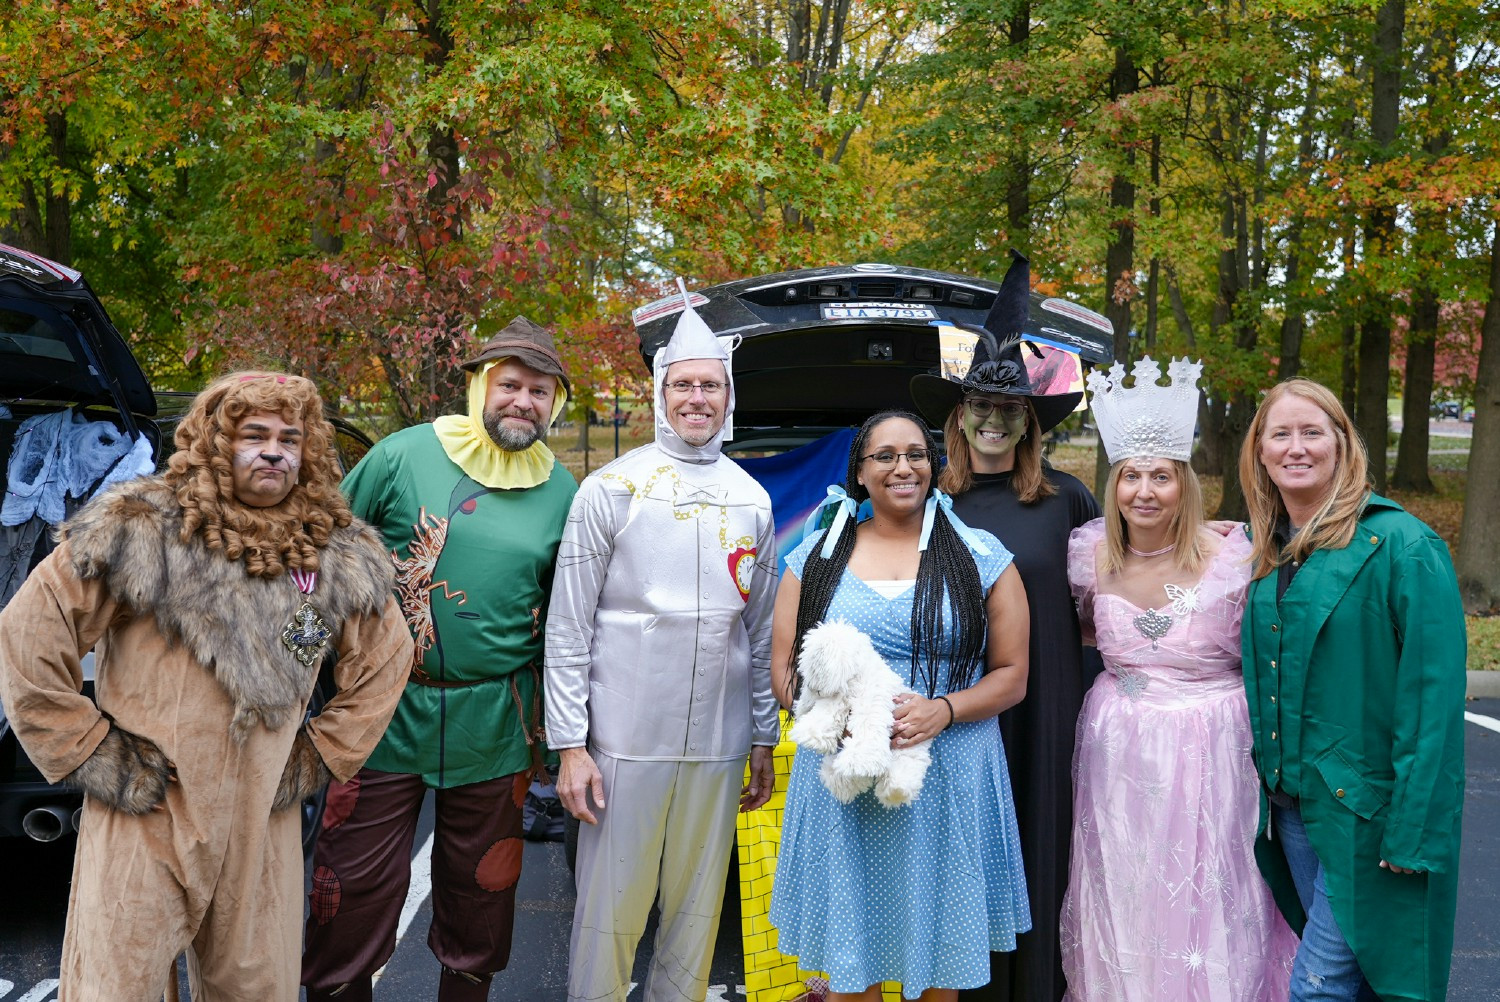 The Family Matters BRG hosted a trunk or treat event at Bread Financial's Columbus office.